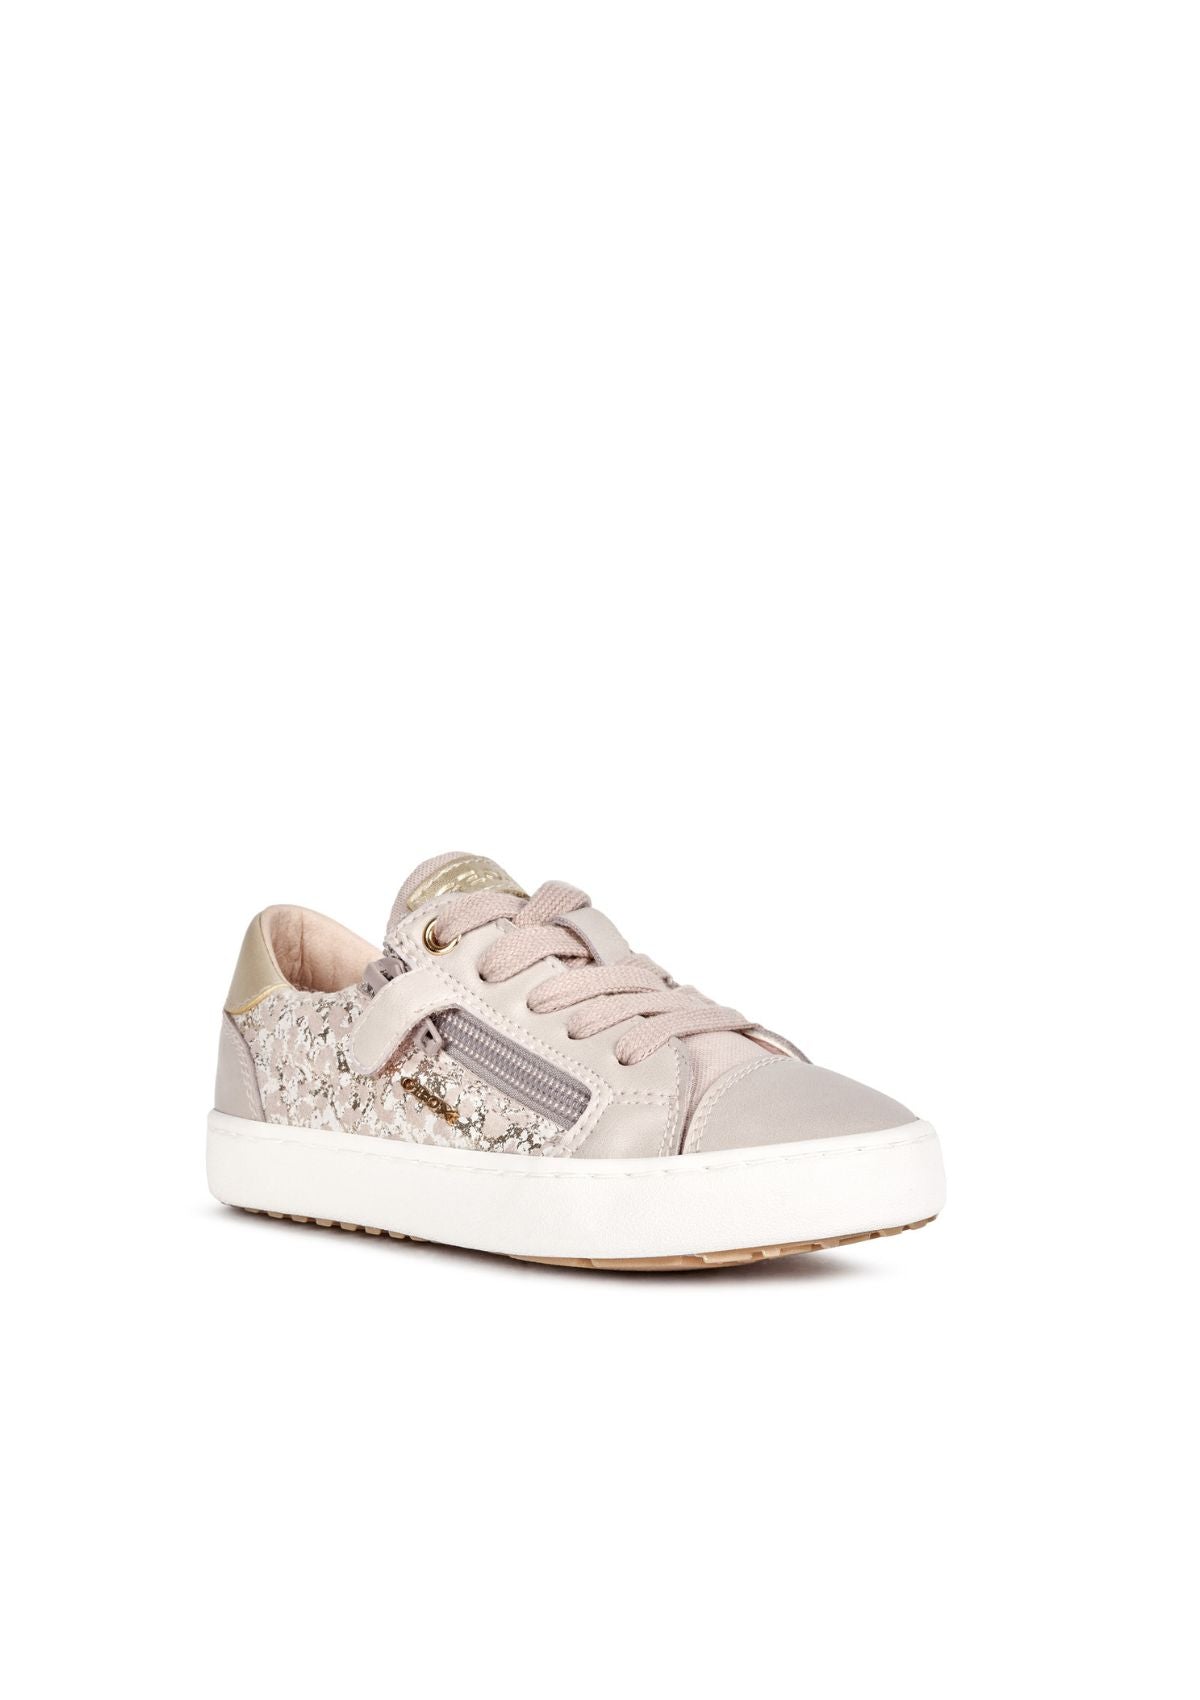 Geox Girls Trainers KILWI Metallic Pink side front